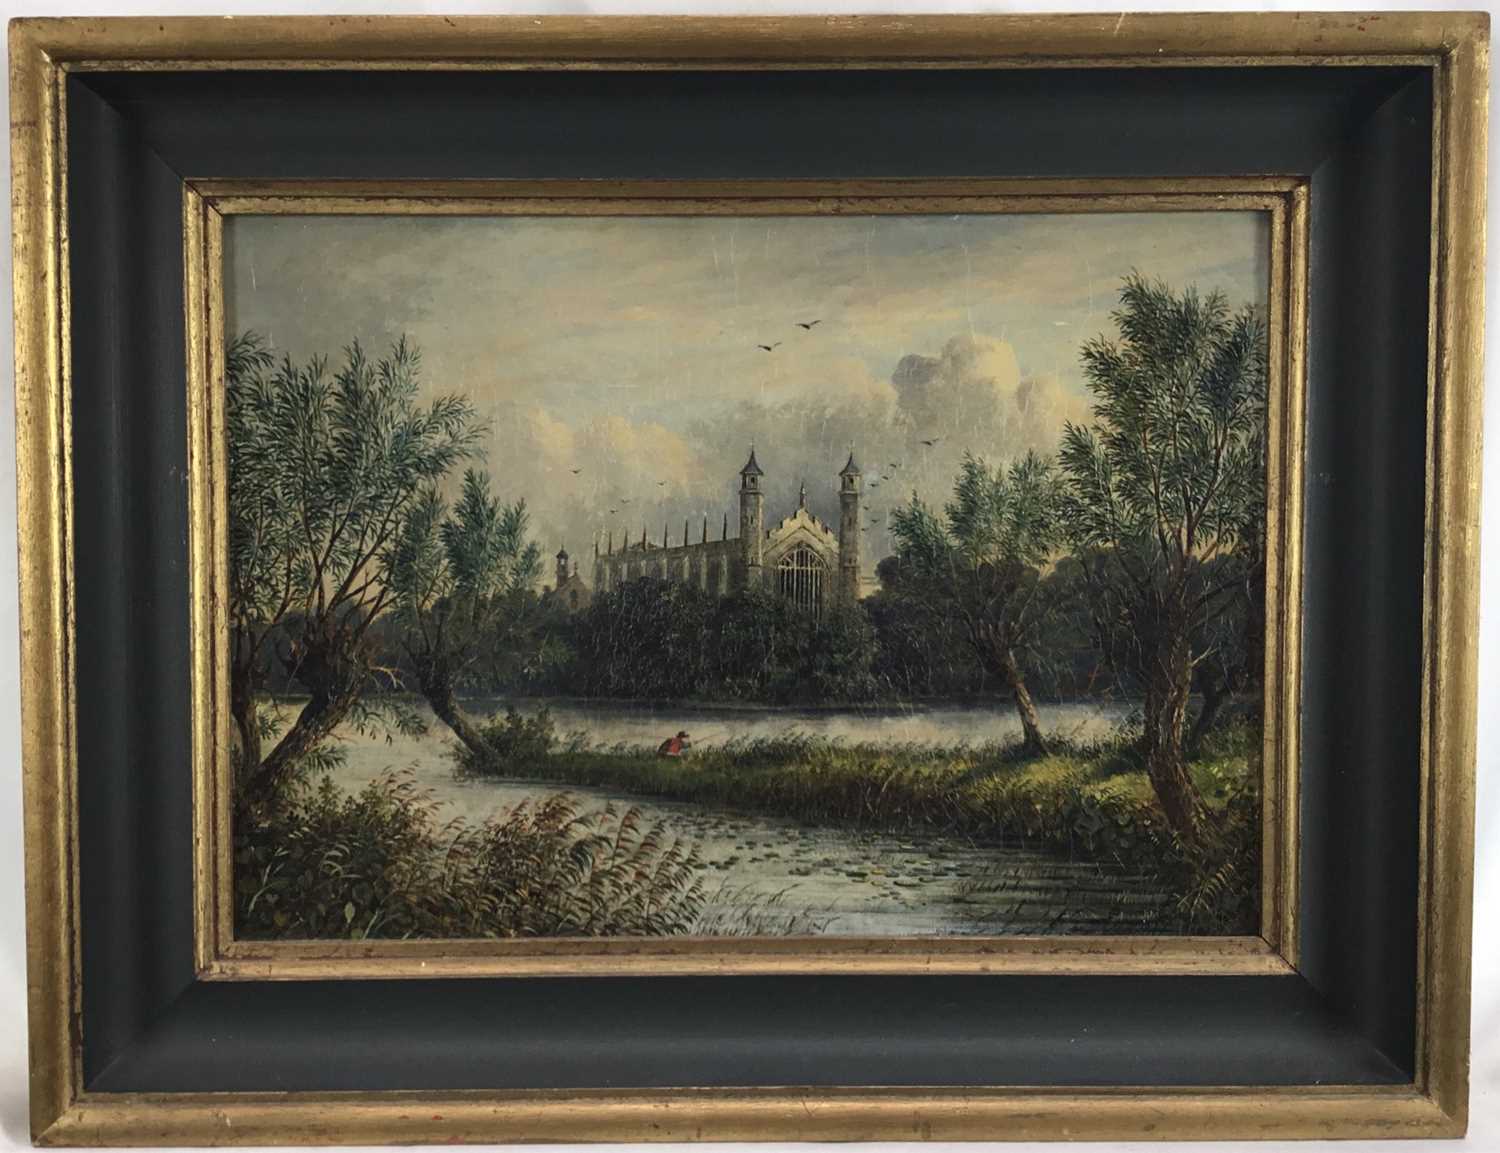 19th century English School, oil on canvas - view of Eton from the river